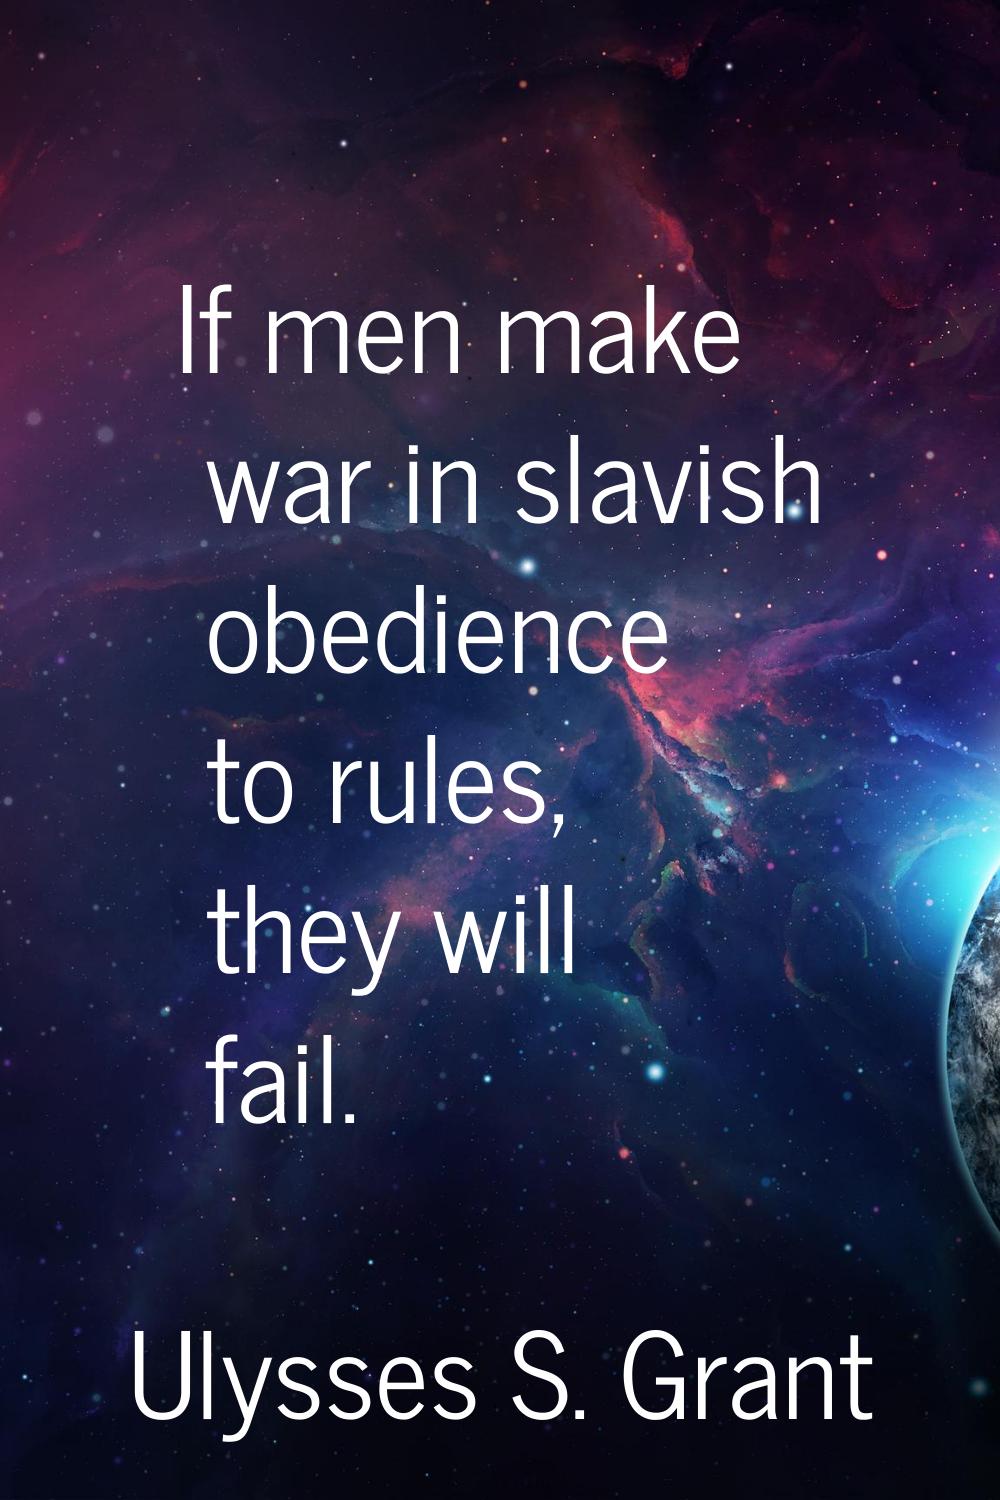 If men make war in slavish obedience to rules, they will fail.